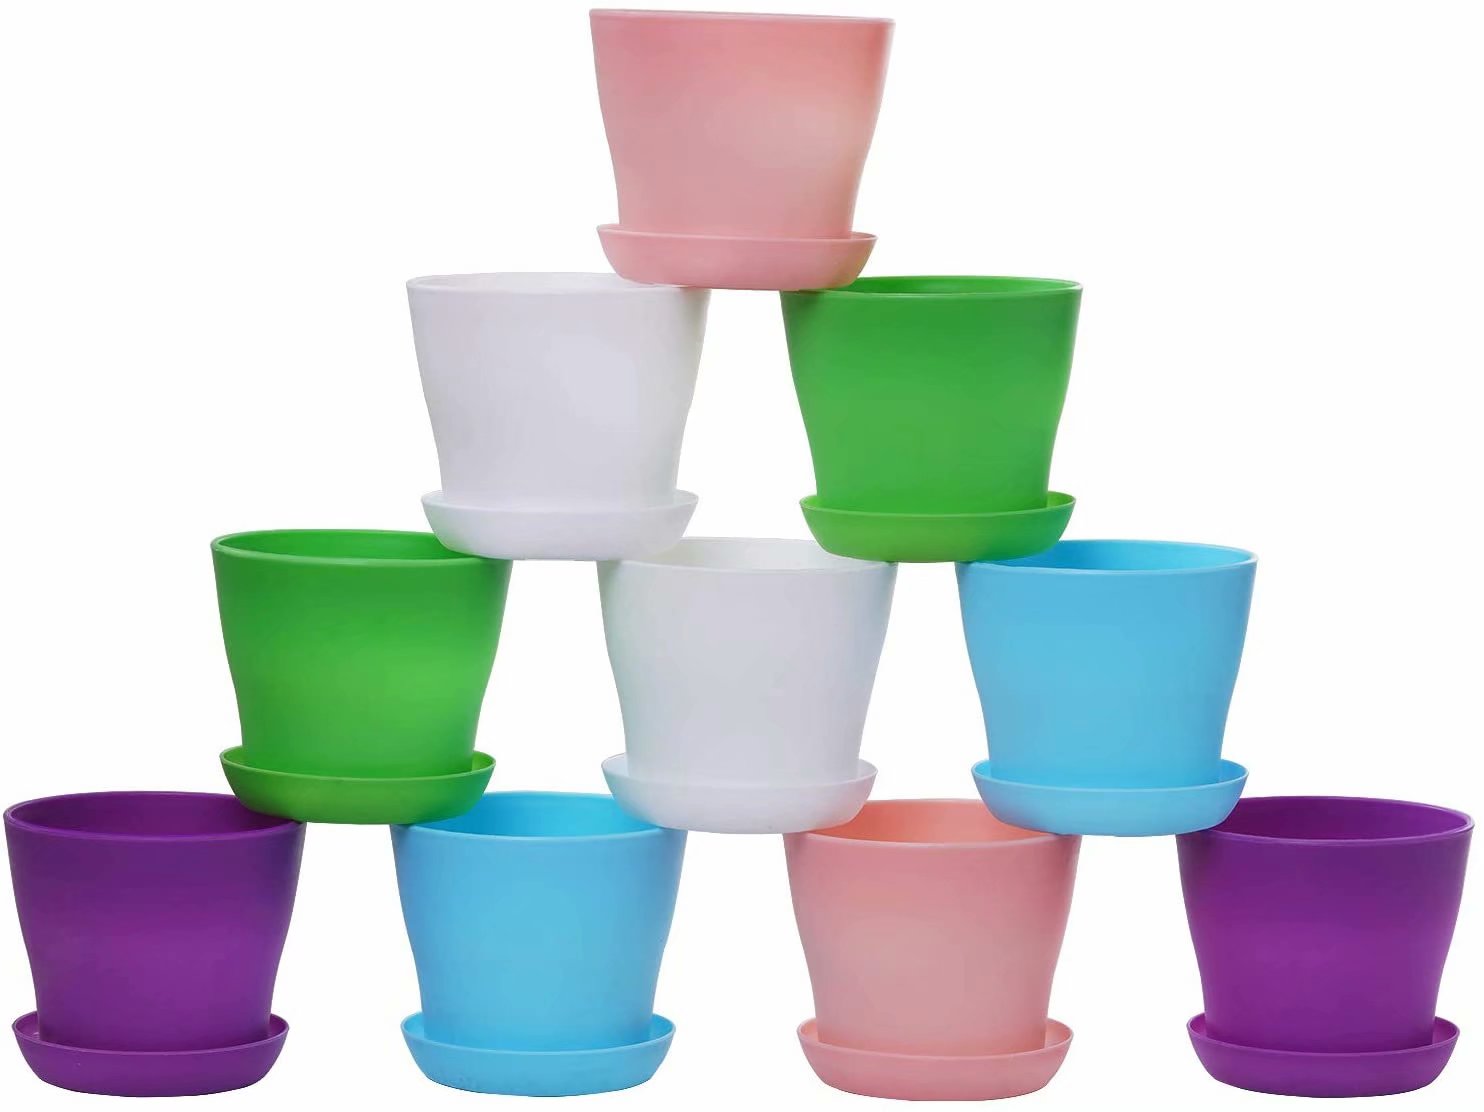 Artrylin Plant Pots, 8 Pack Plastic Flower Pots Outdoor Garden Planters with Multiple Drain Holes and Saucer -4.7 inch Indoor Small Plant Pots for All Home, Random Color - image 3 of 4